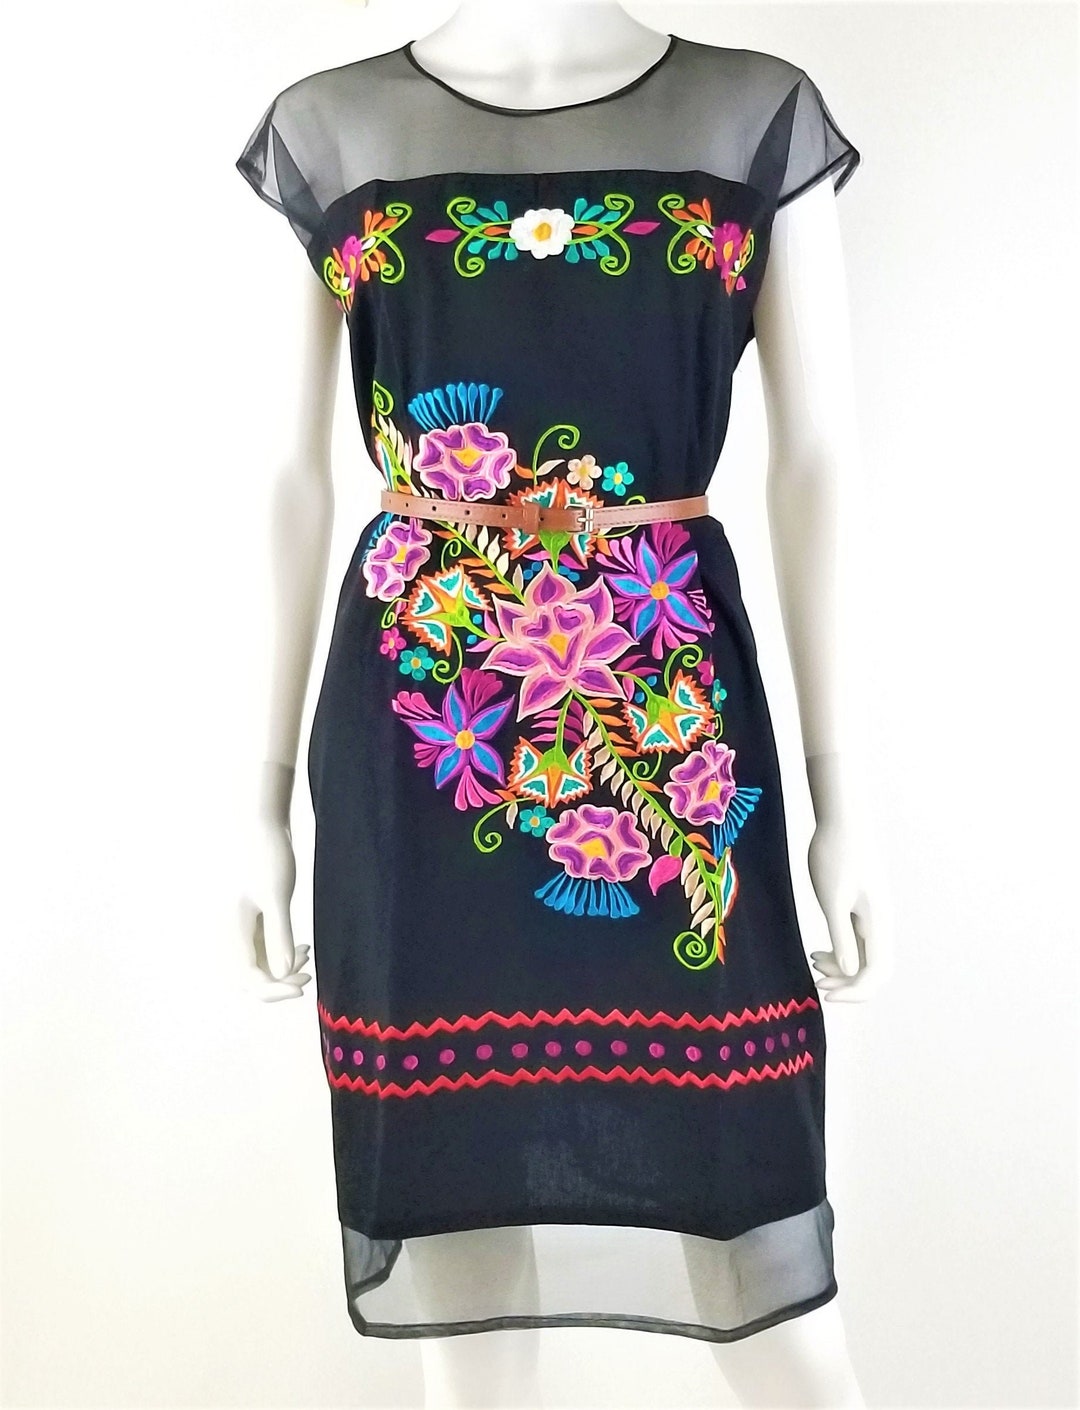 Embroidered Mexican Dress, Oaxaca Dress, Floral Embroidered Chiffon ...